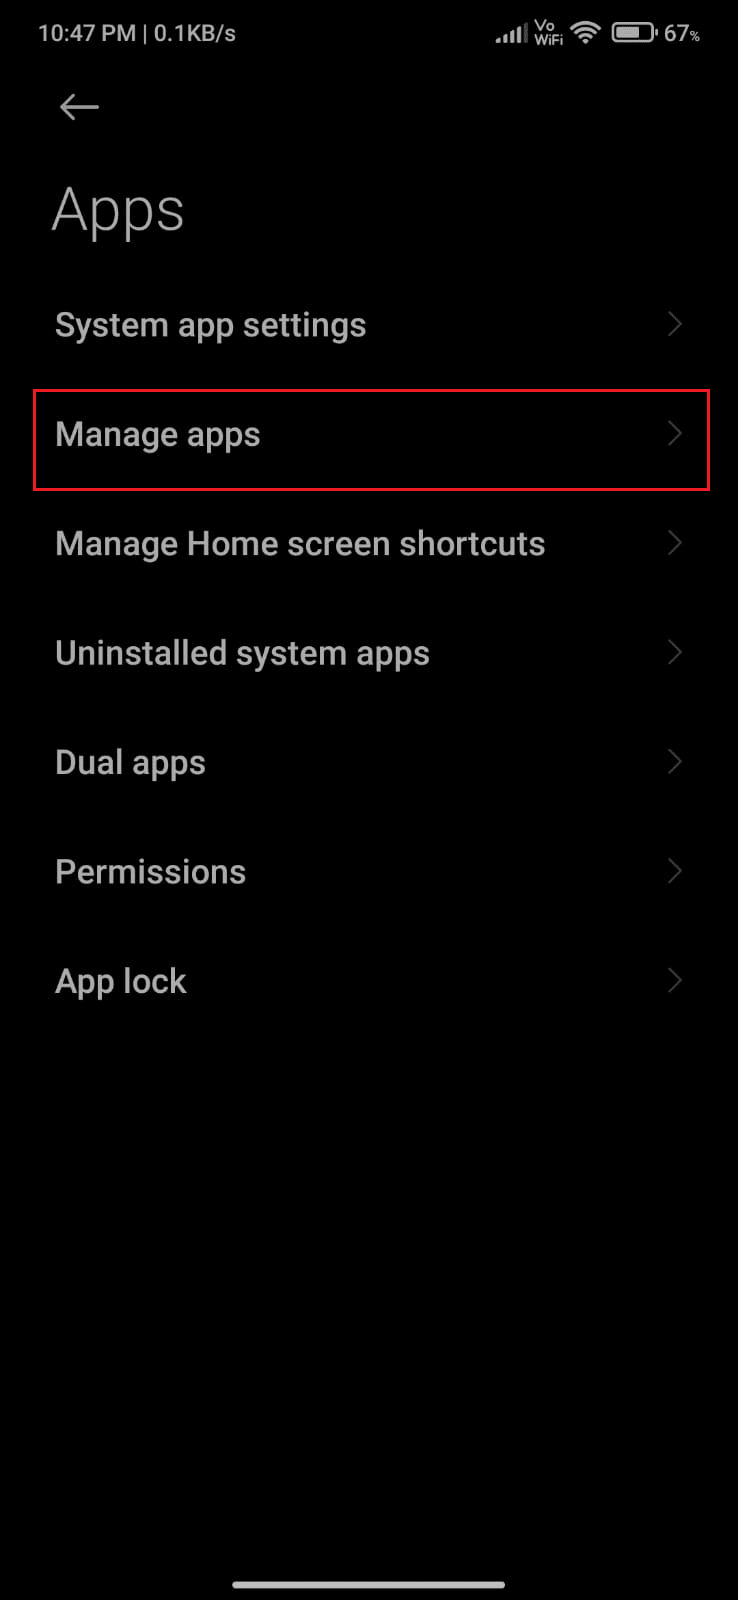 And then, tap on Manage apps.